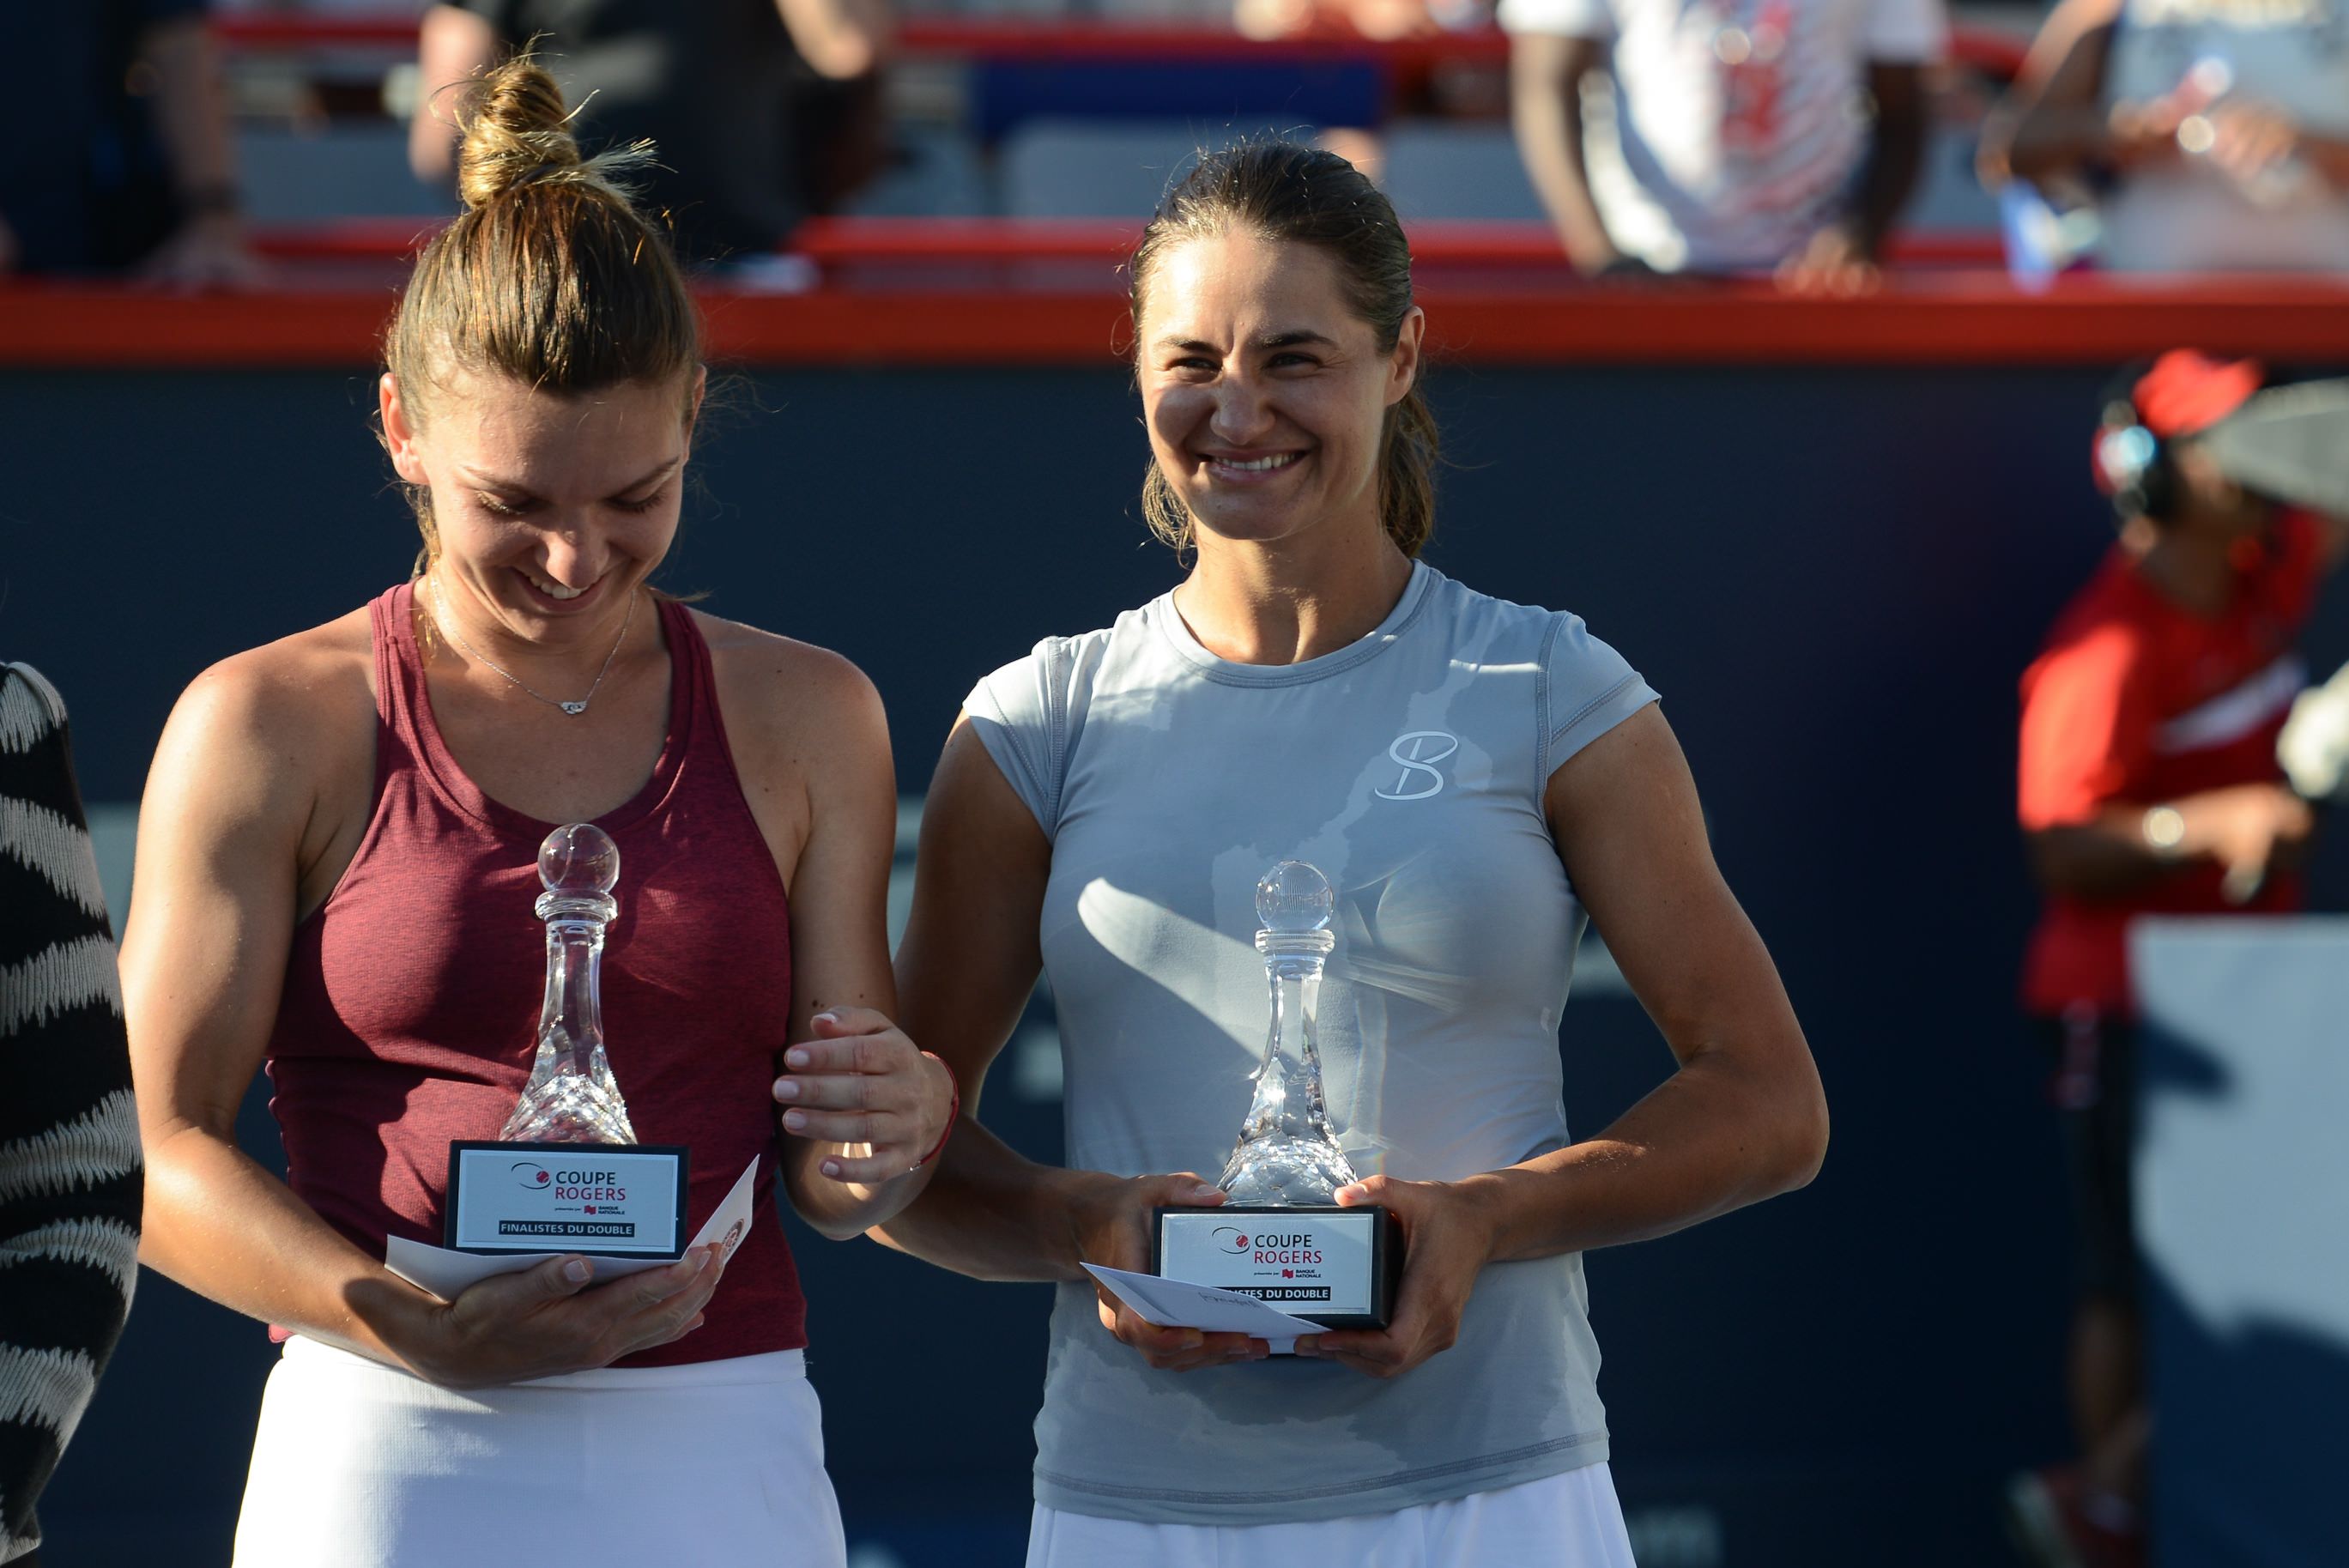 Nobody beats Canadians in hospitality. Their trophy for female winners of their tennis open.